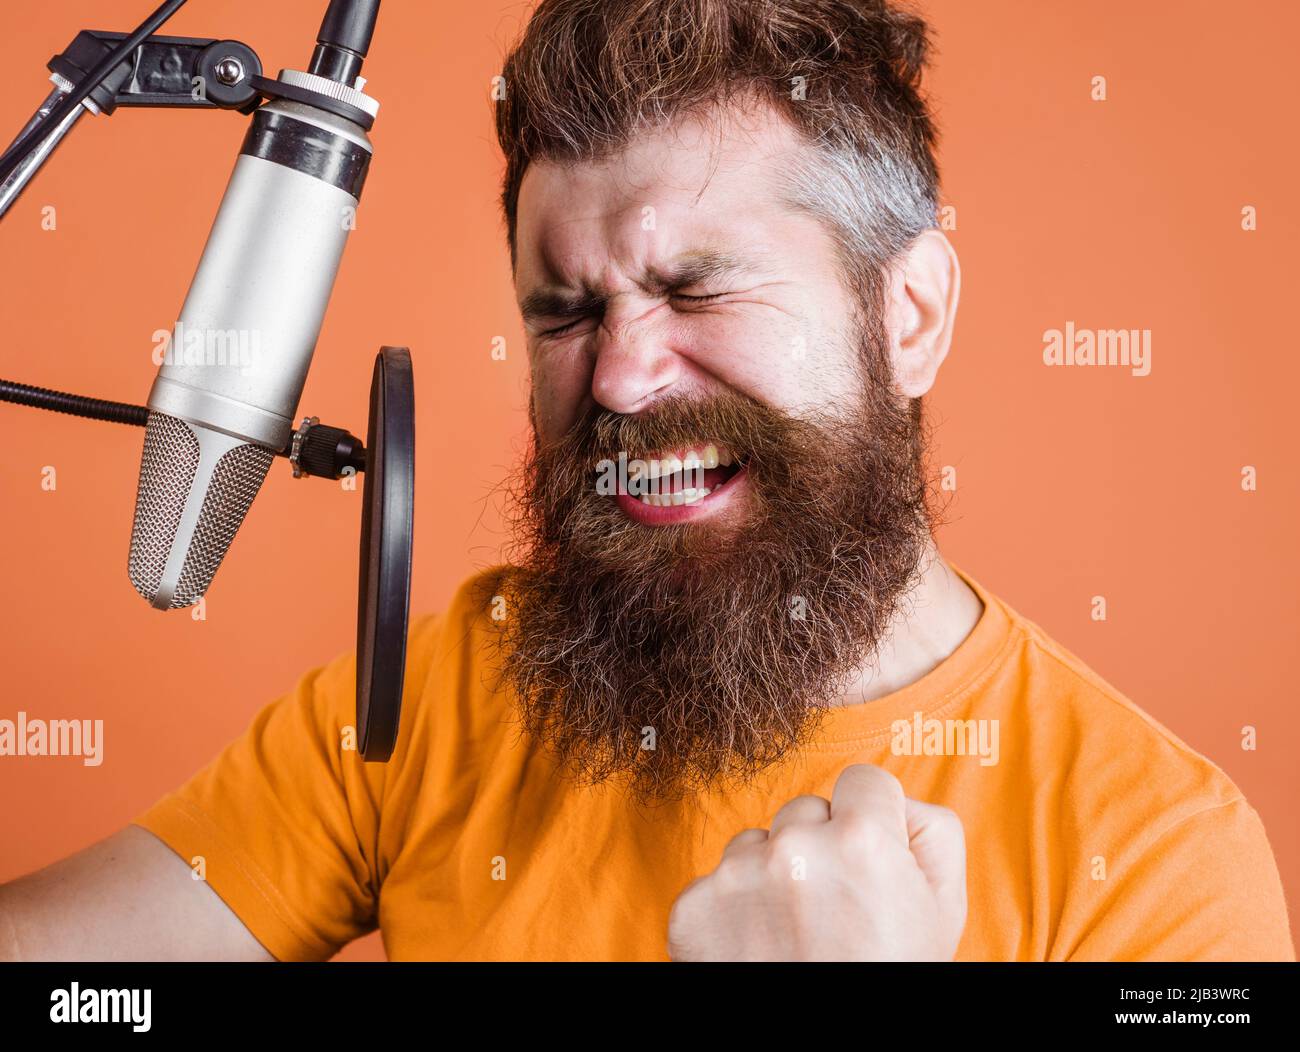 Bearded man sings in condenser microphone at recording studio. Emotional Male professional vocalist. Stock Photo